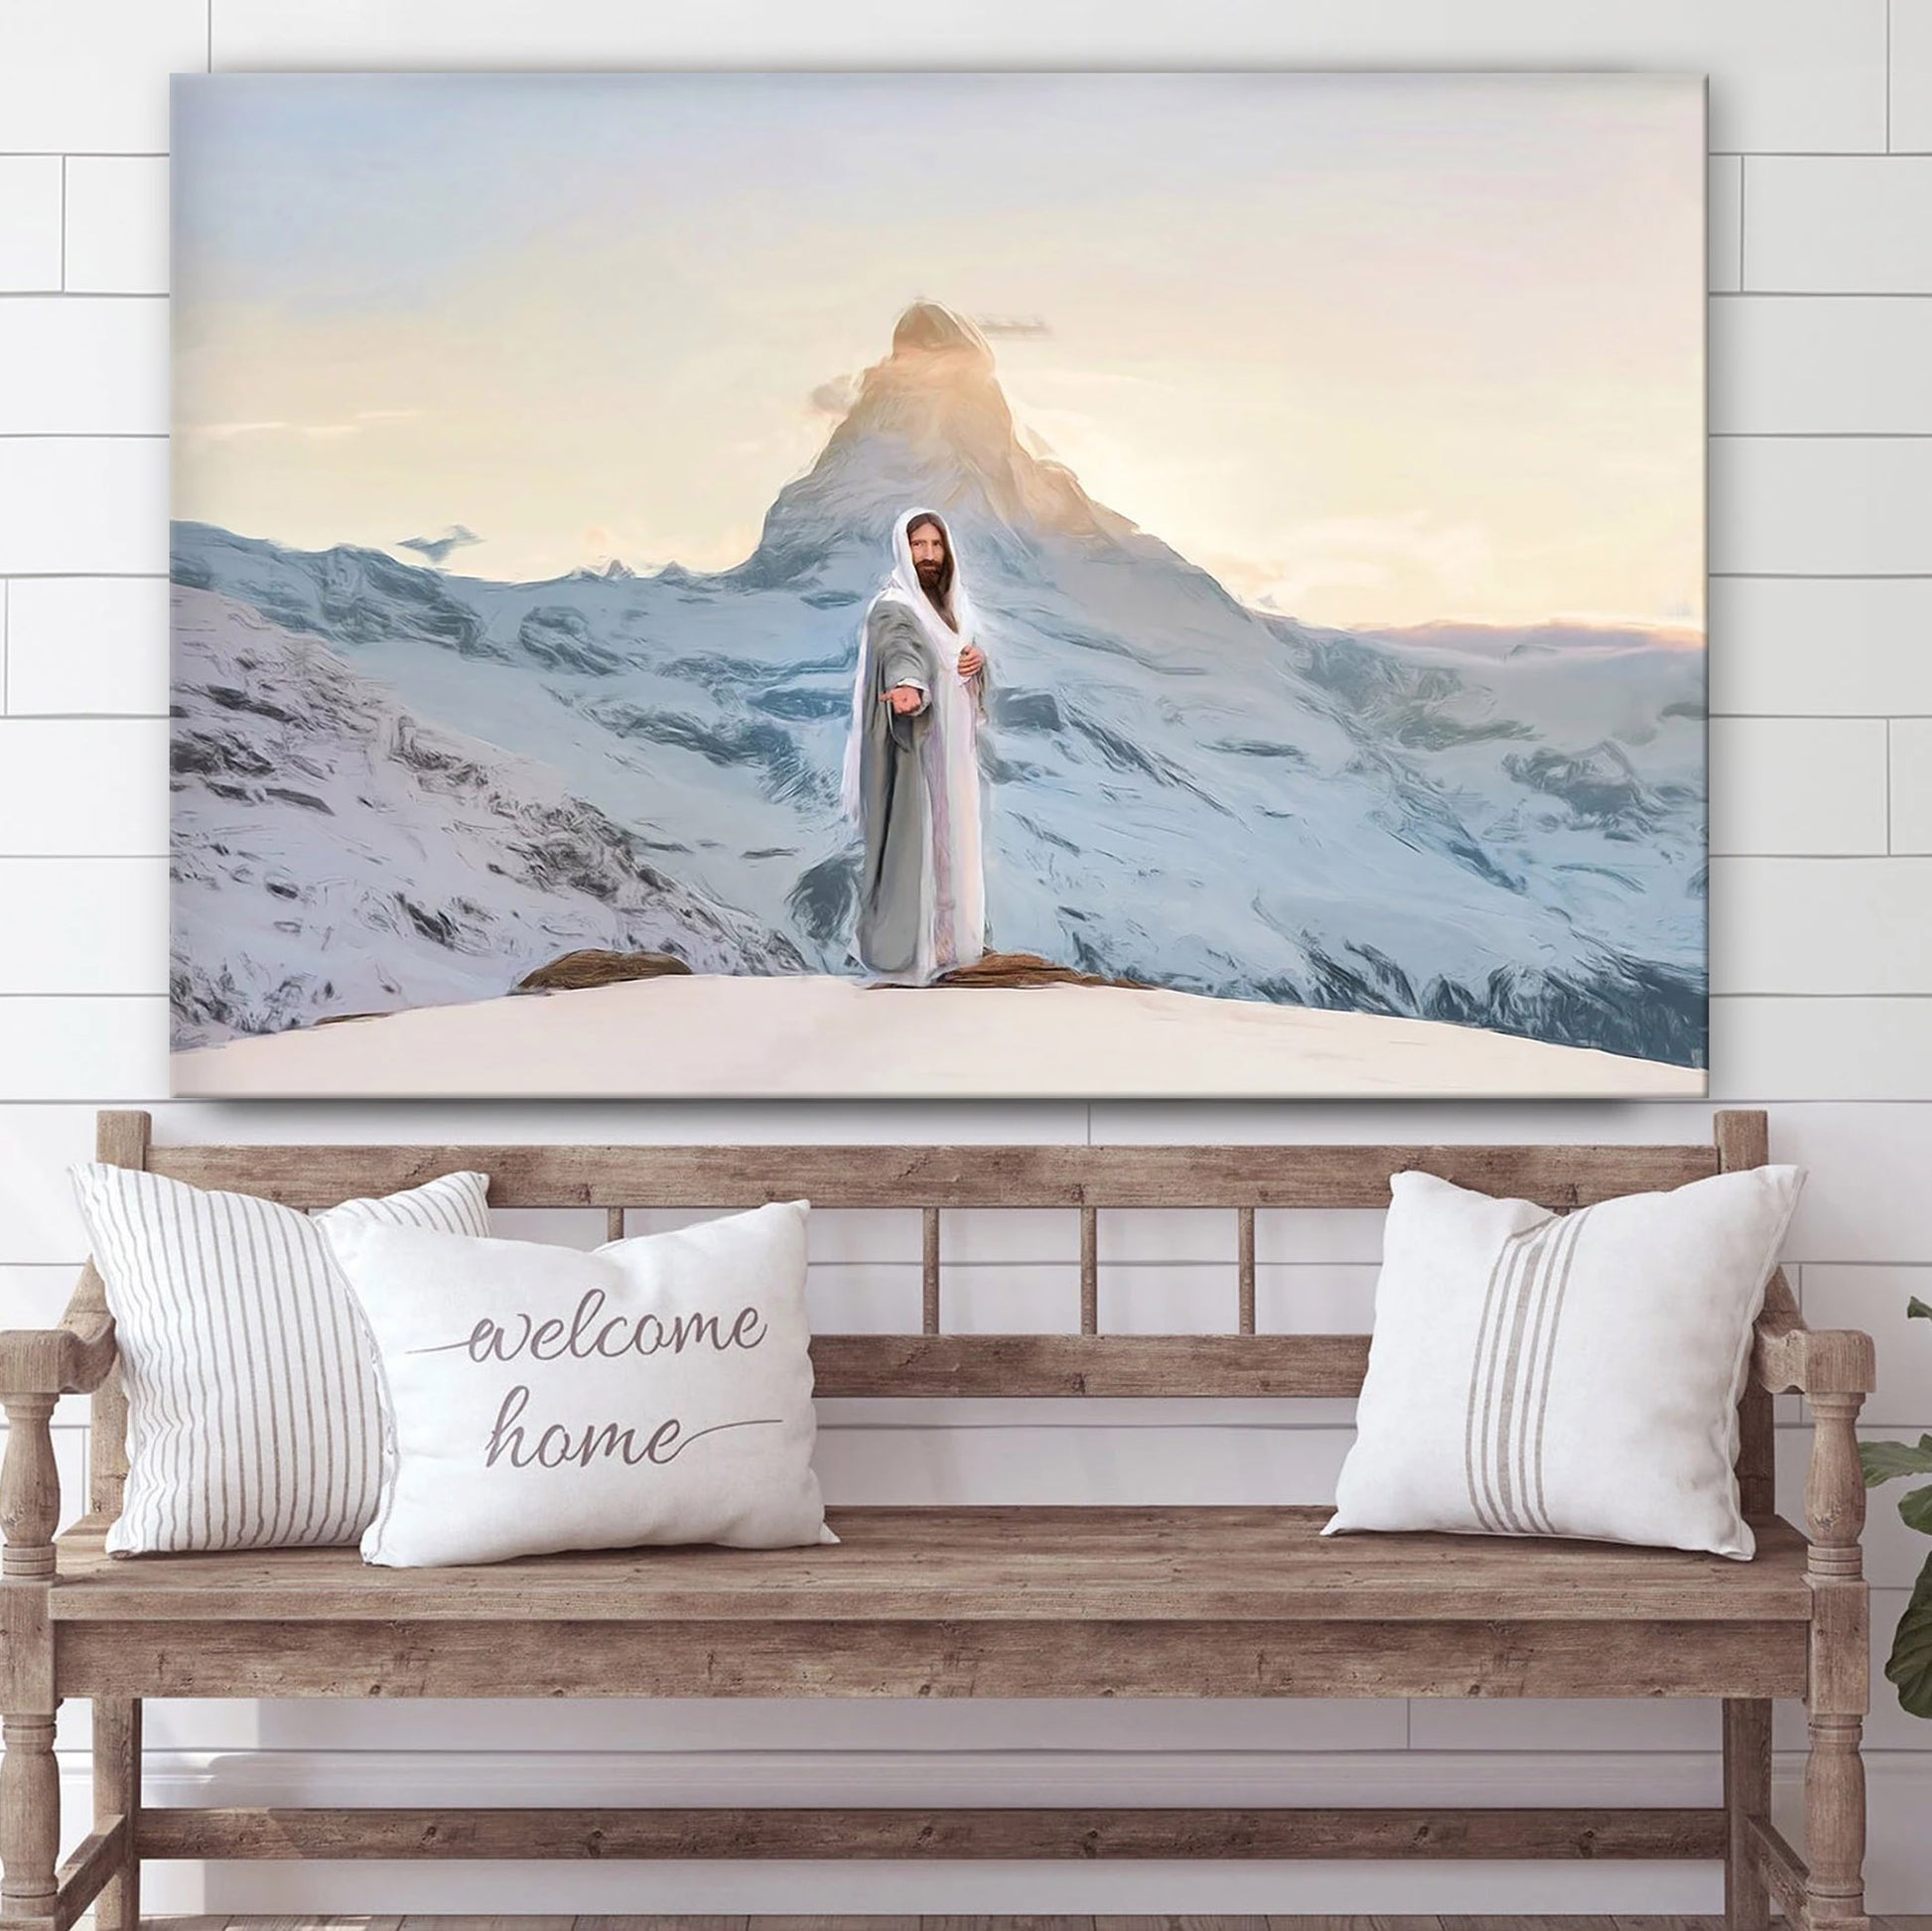 Jesus Christ Art Lds Art To Move Mountains - Jesus Canvas Pictures - Christian Wall Art